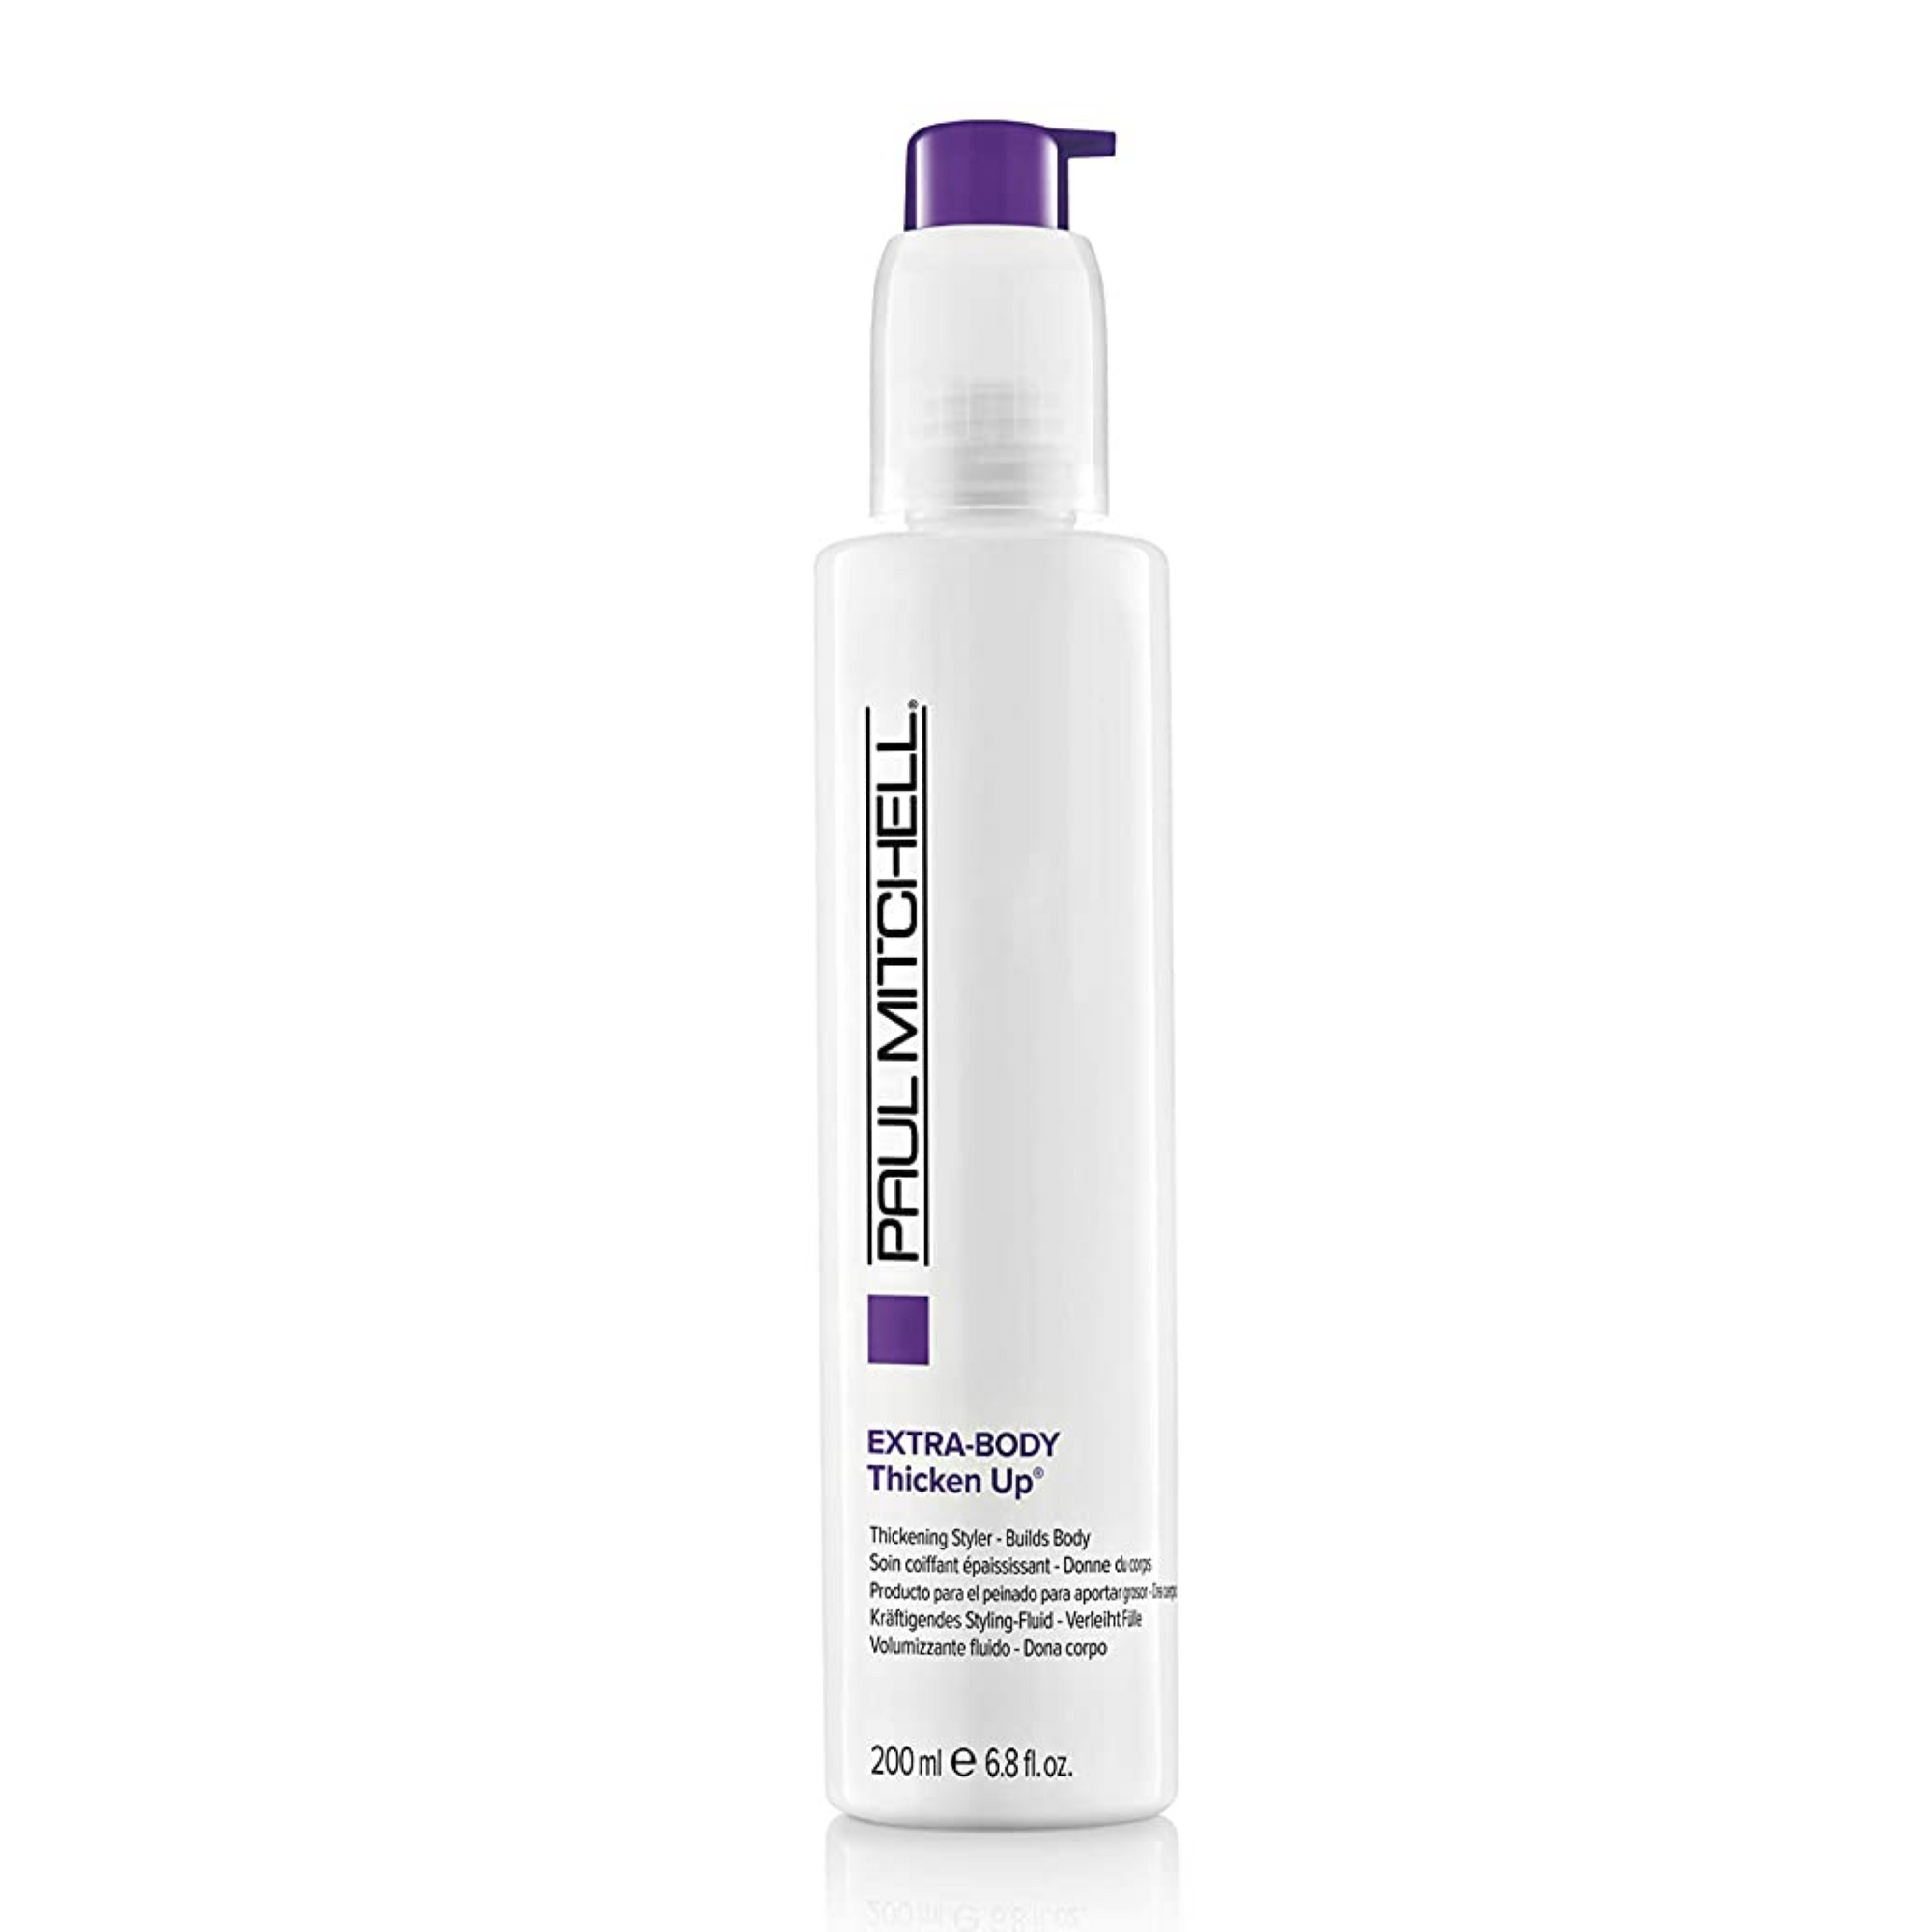 Paul Mitchell Extra-Body Thicken Up Styling Liquid / 6.8 / SWATCH